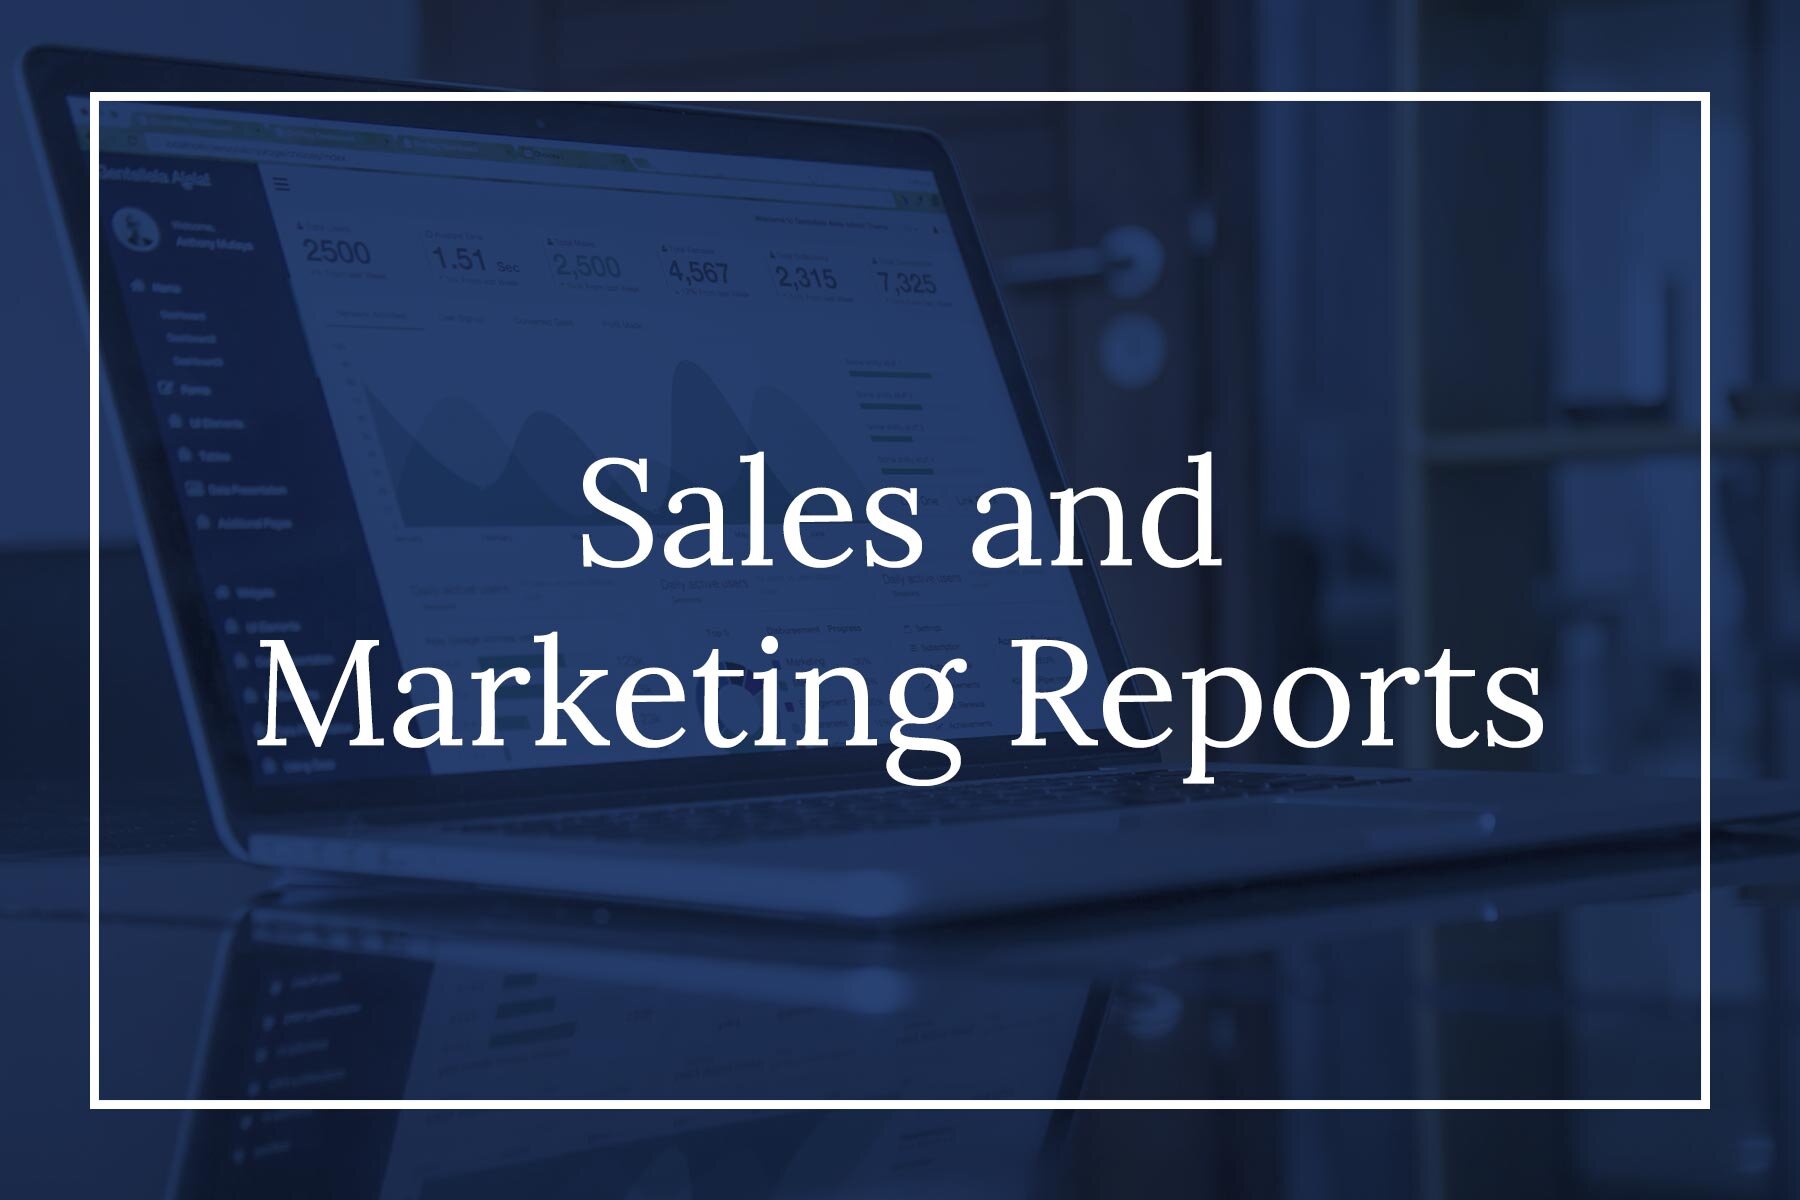 sales-and-marketing-reports.jpg